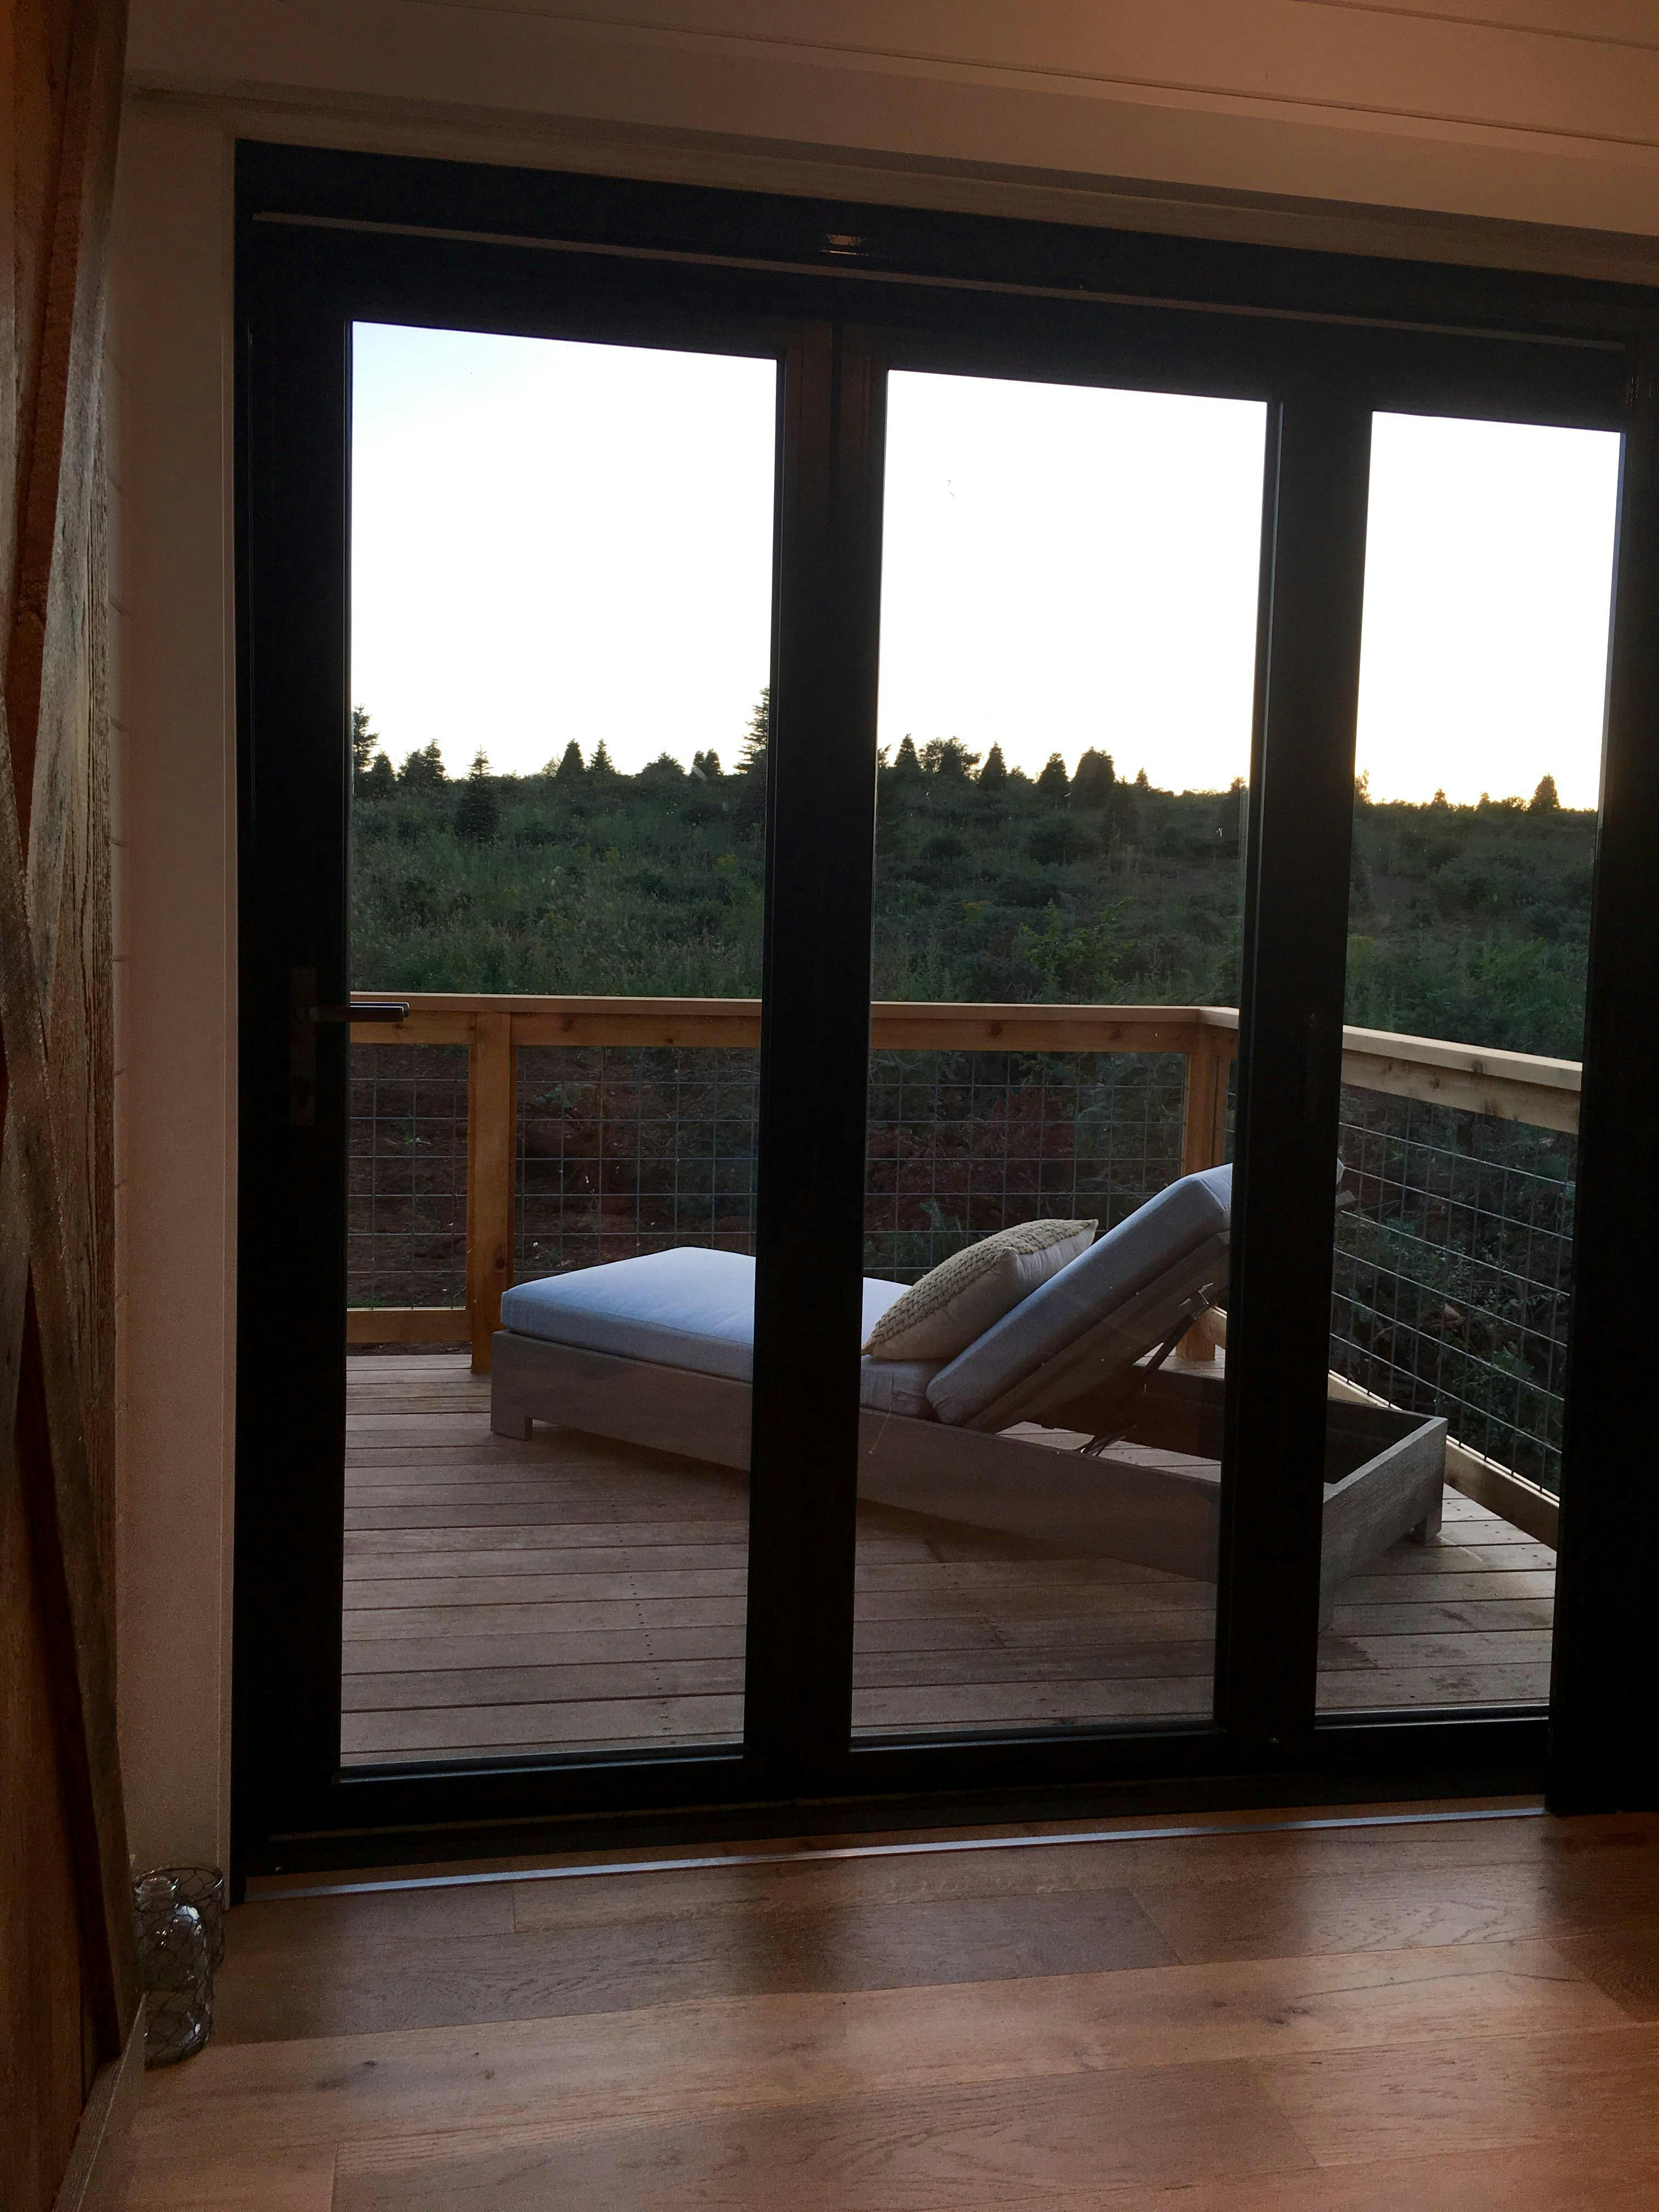 The master bedroom inside Shawn and Shelly's tiny home in Maui